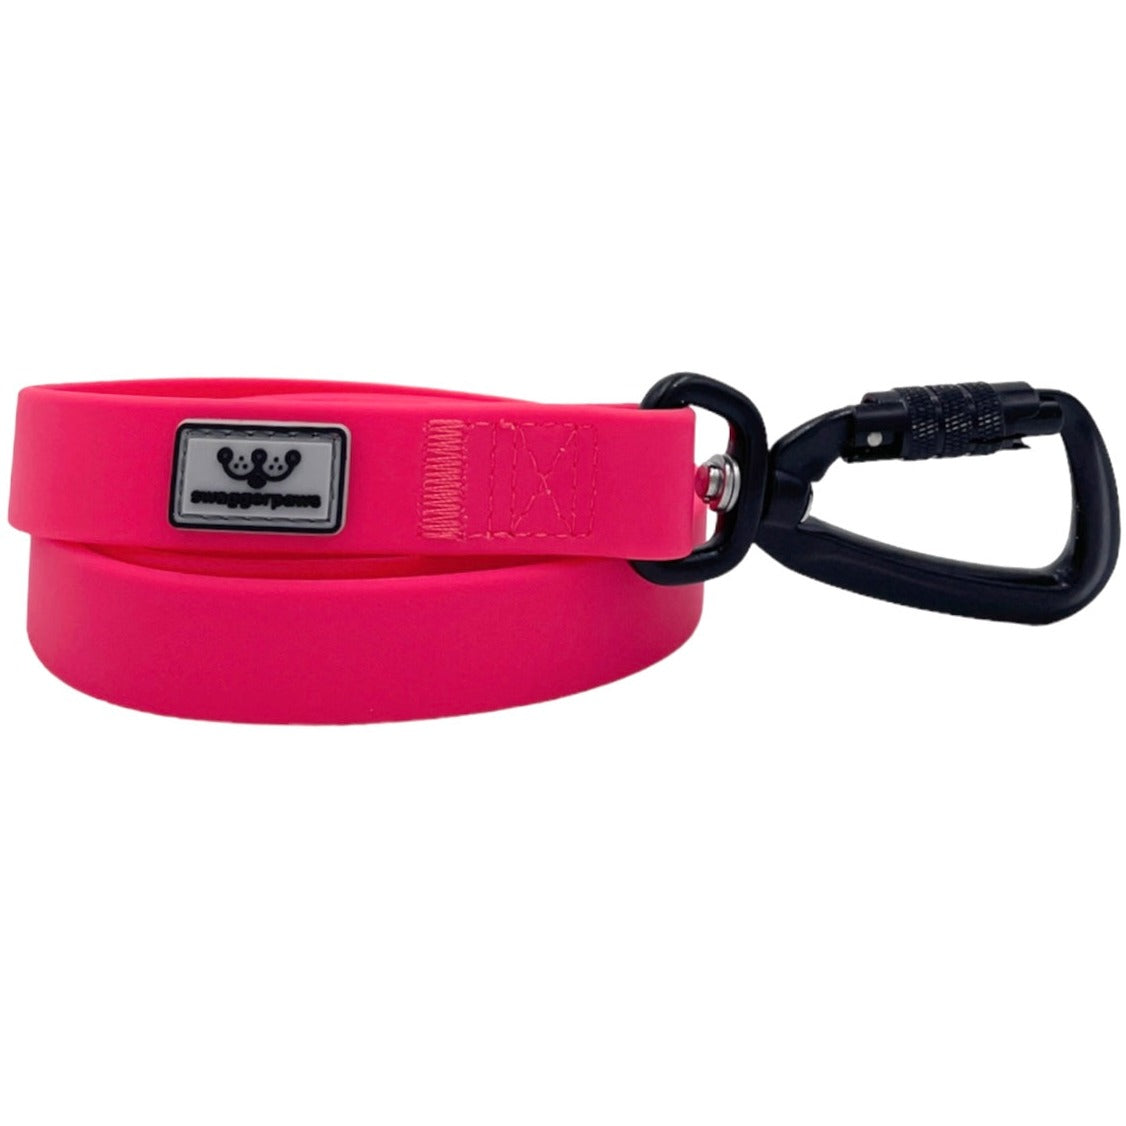 SwaggerPaws waterproof dog lead with auto-lock carabiner, raspberry red